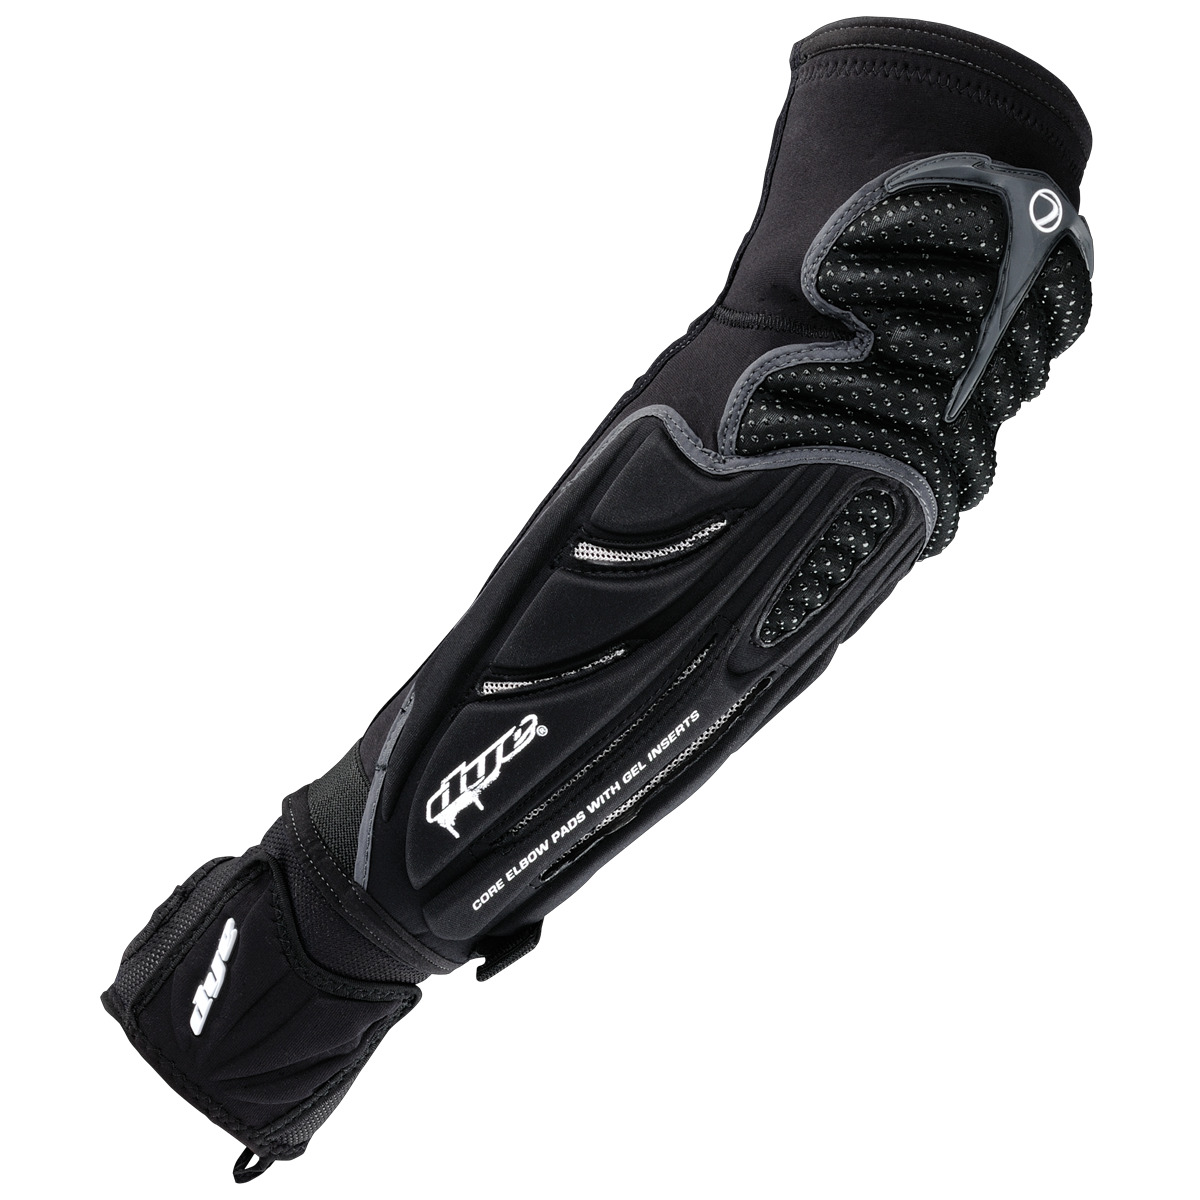 Dye Performance Elbow Pads - Black - Small Default Title